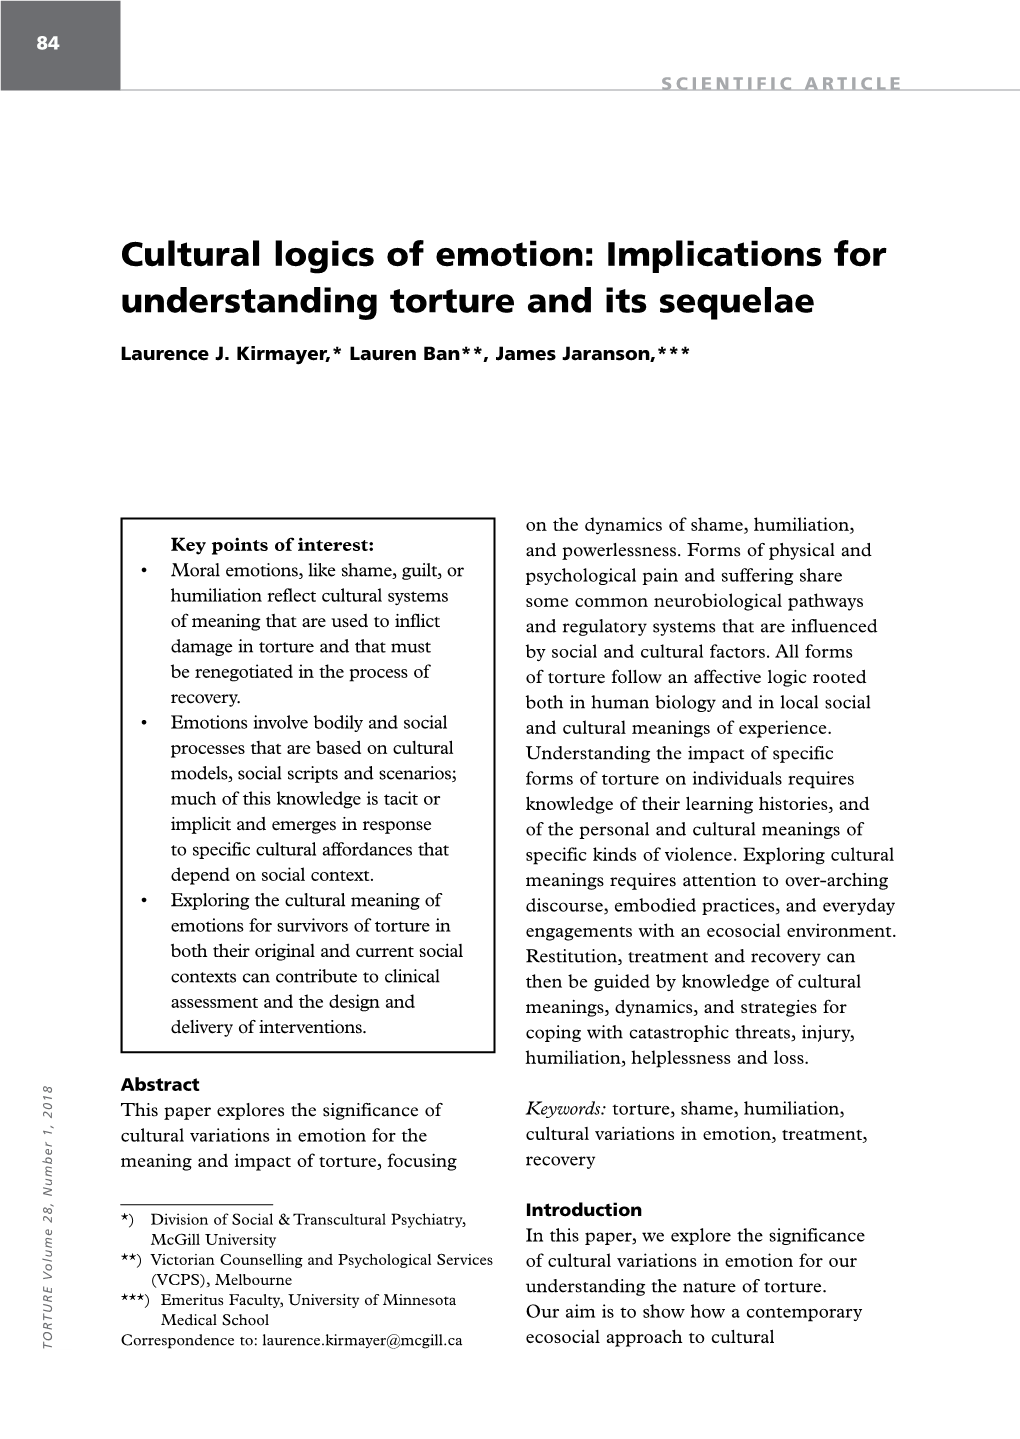 Cultural Logics of Emotion: Implications for Understanding Torture and Its